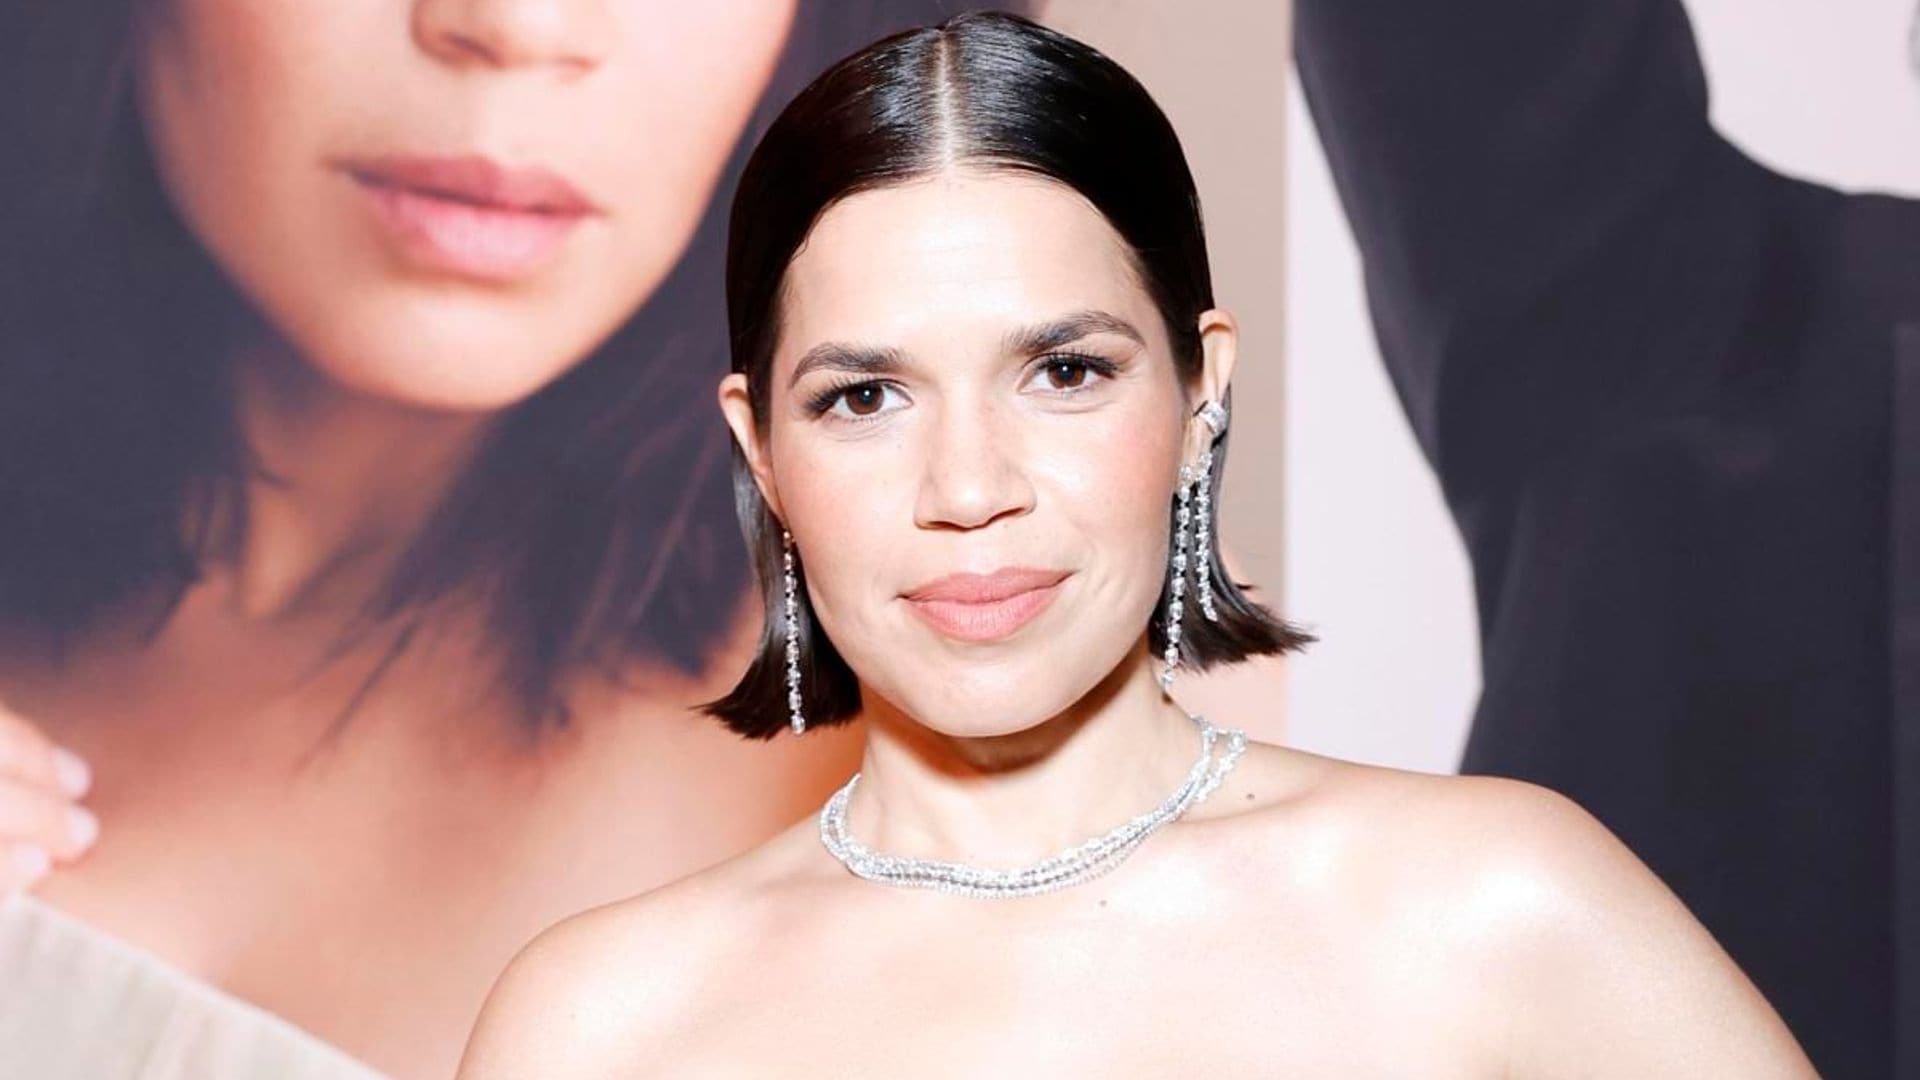 America Ferrera is excited about the possibility of an ‘Ugly Betty’ reunion